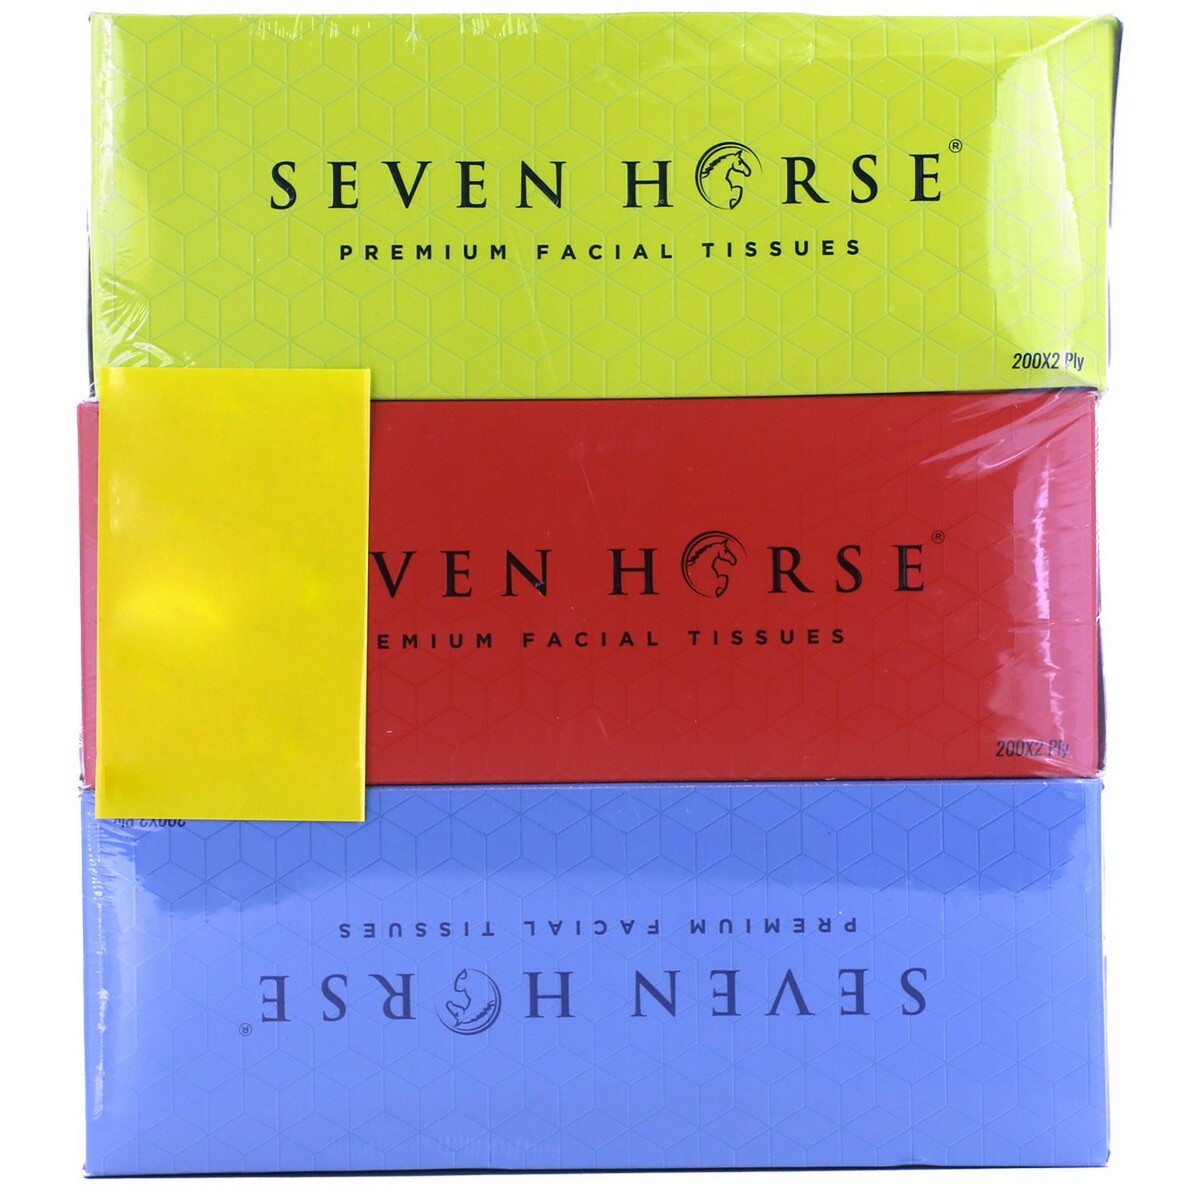 Seven Horse Face Tissue 2 PLY 200 Pulls 2+1 Offer